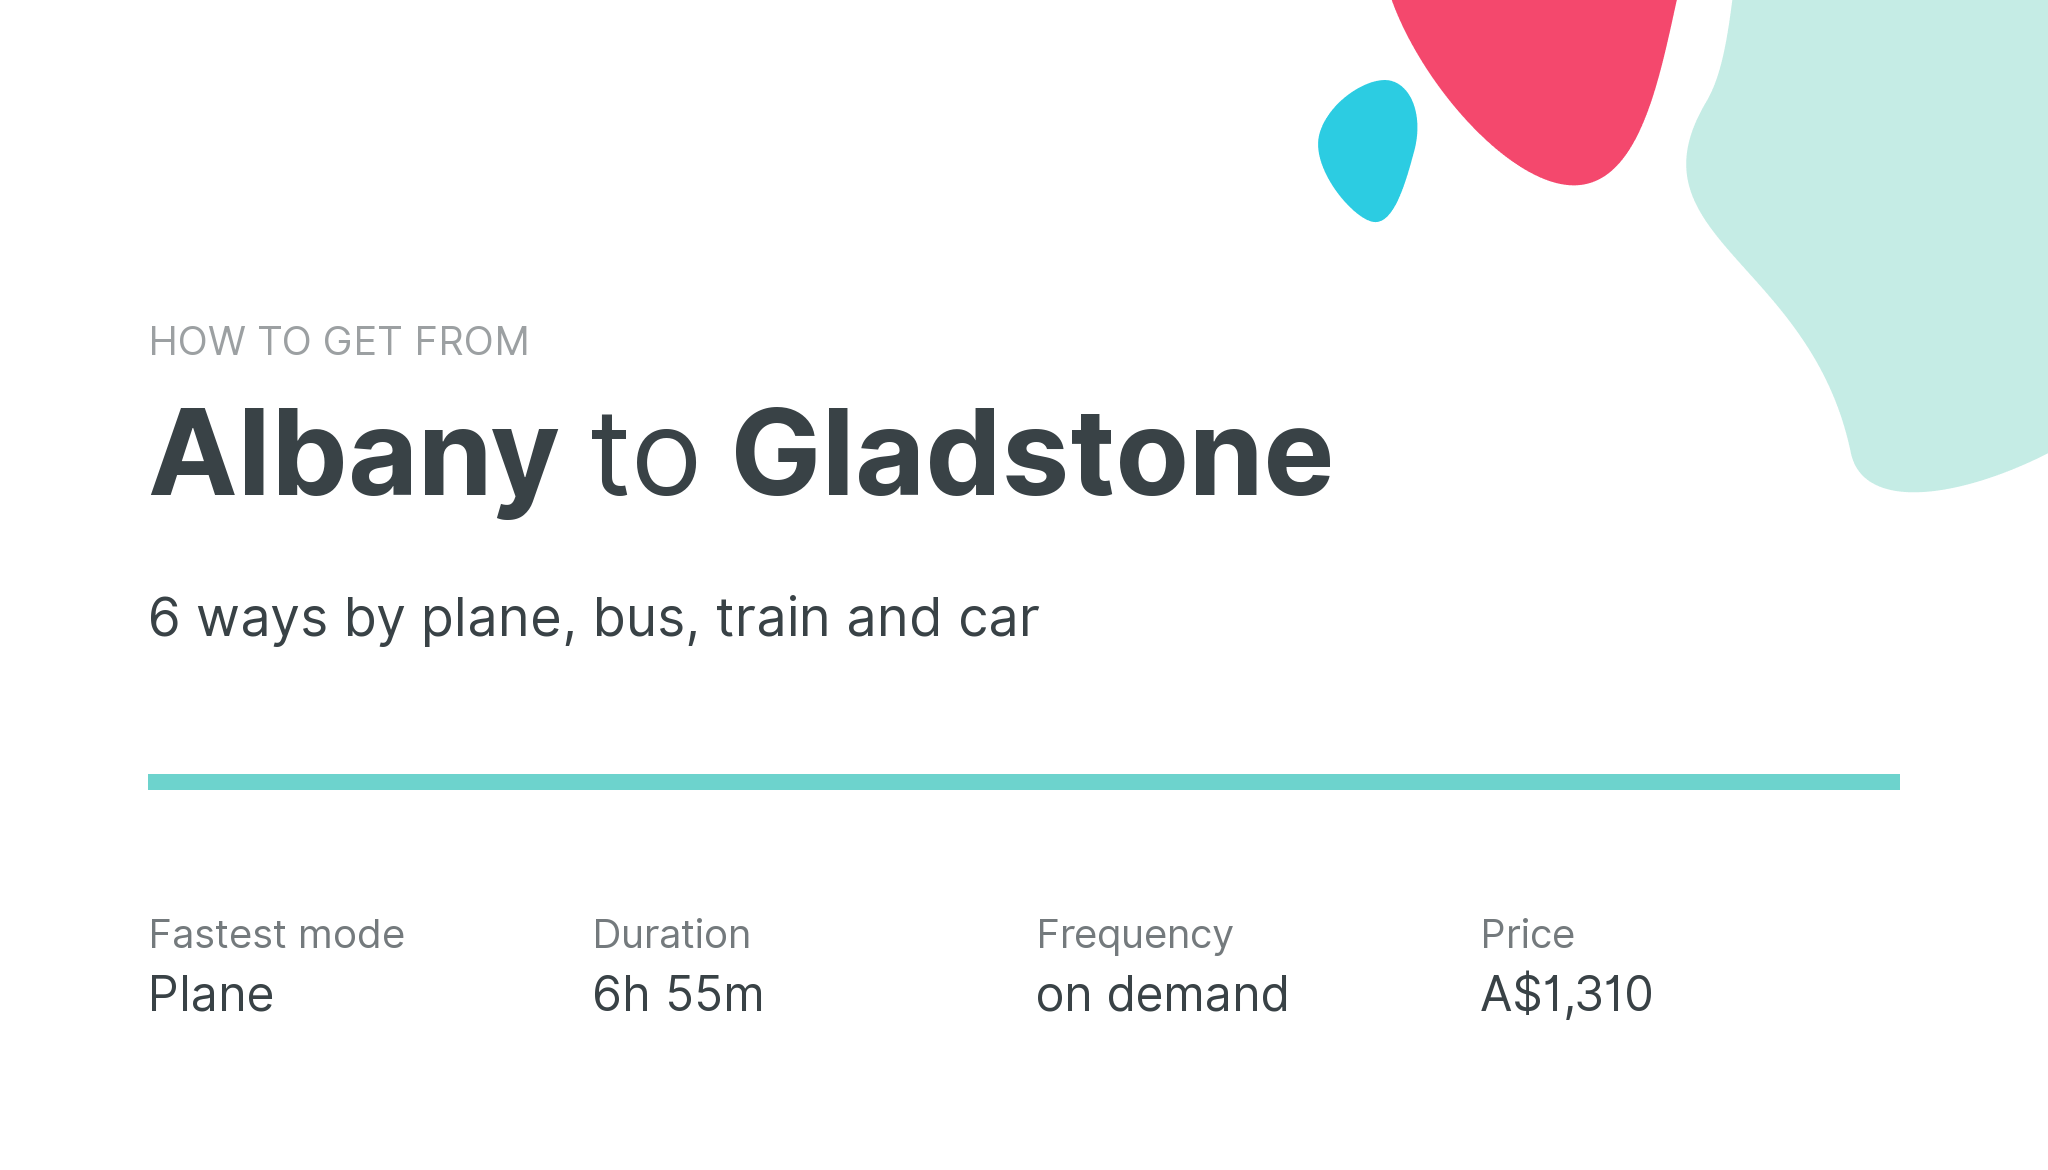 How do I get from Albany to Gladstone